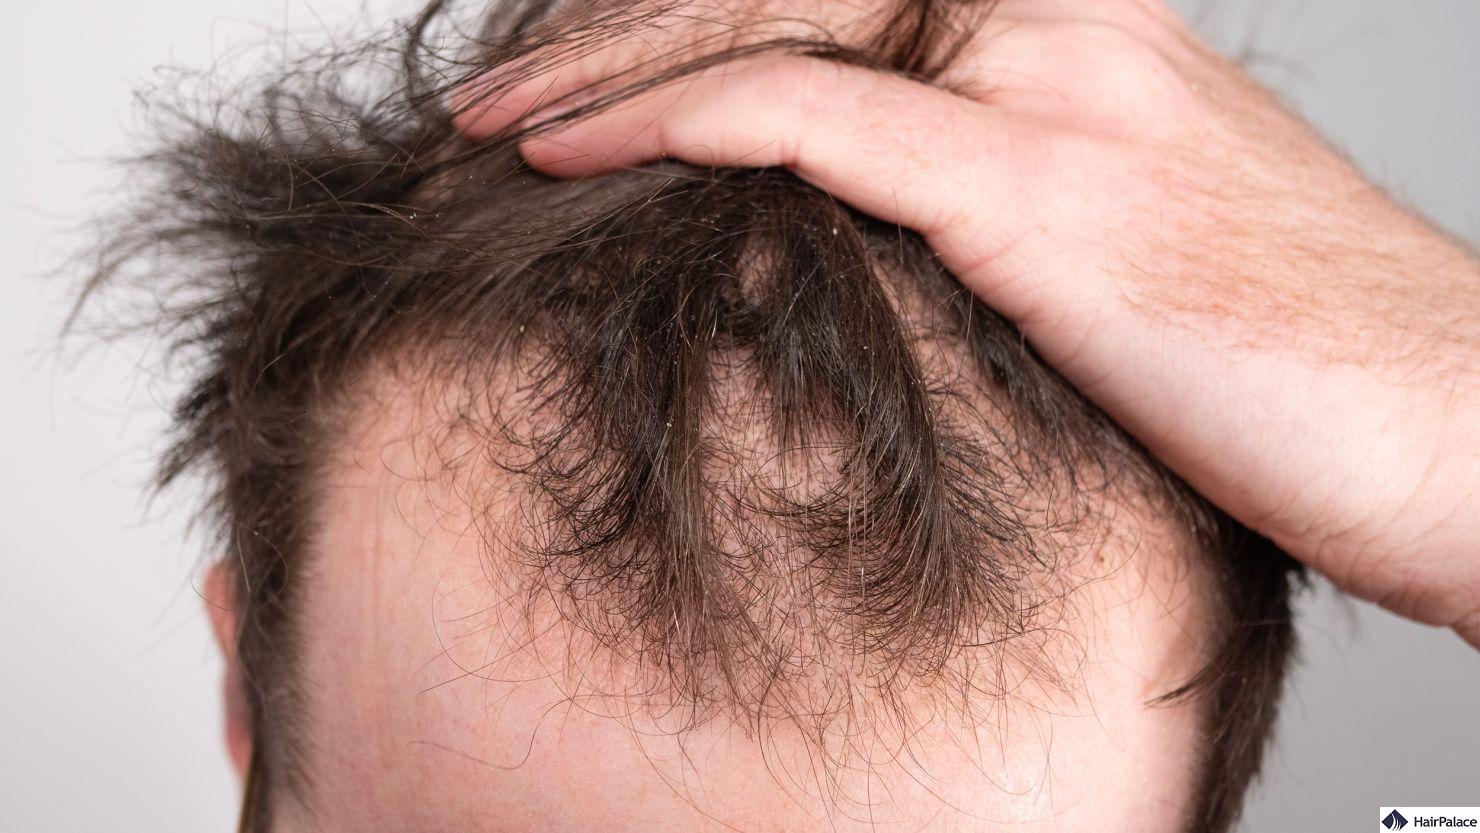 early signs of baldness